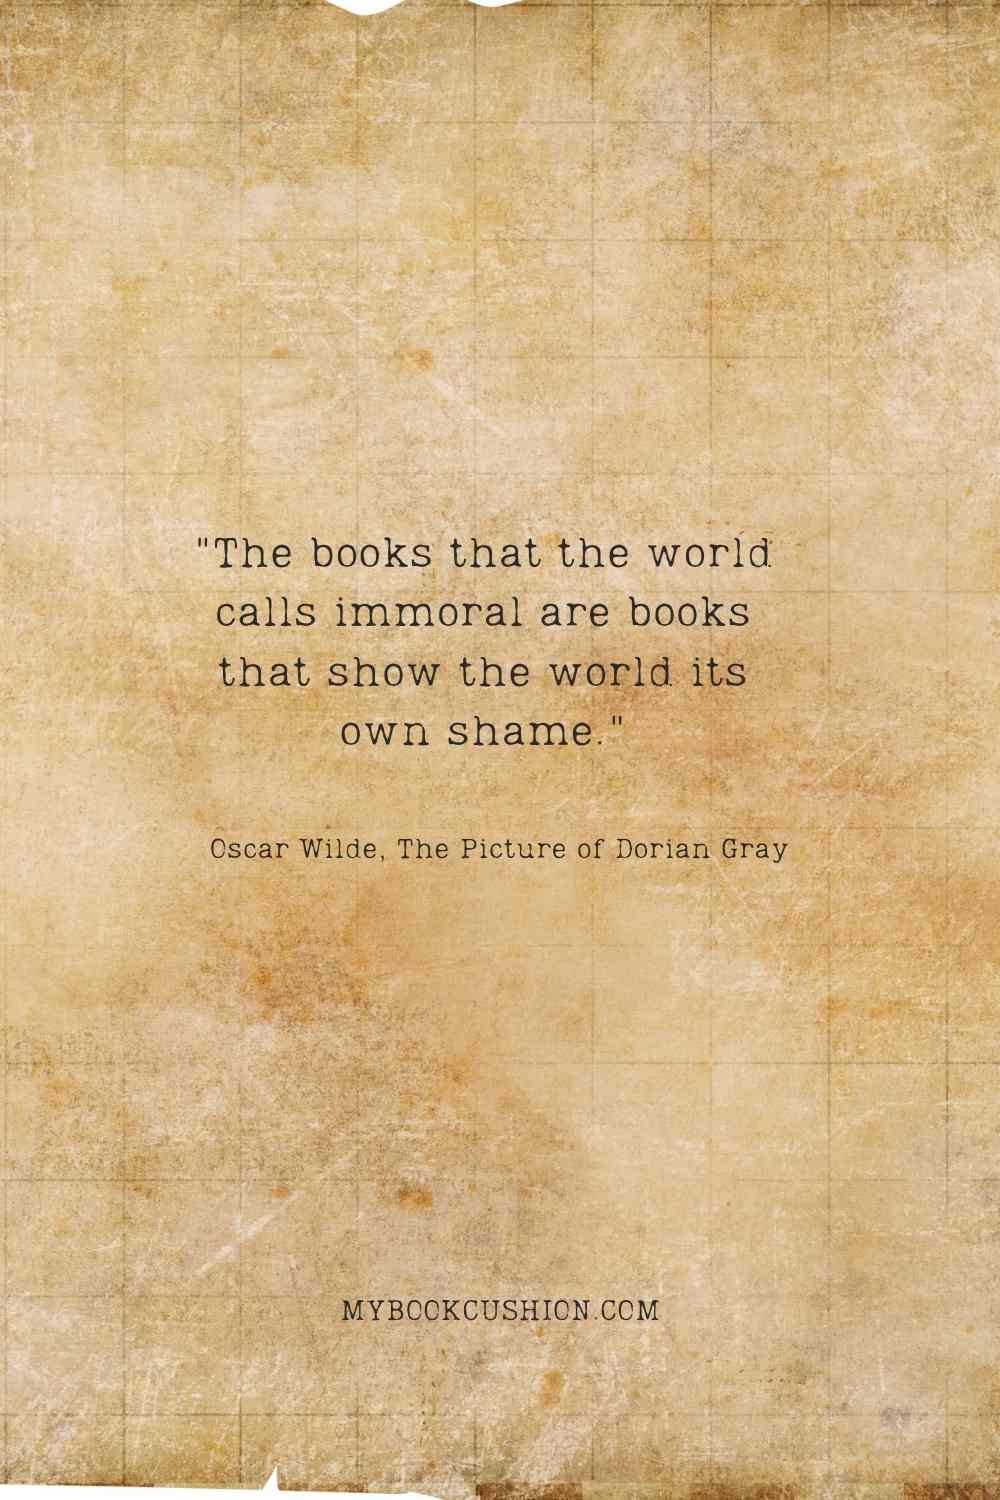 The books that the world calls immoral are books that show the world its own shame. - Oscar Wilde, The Picture of Dorian Gray